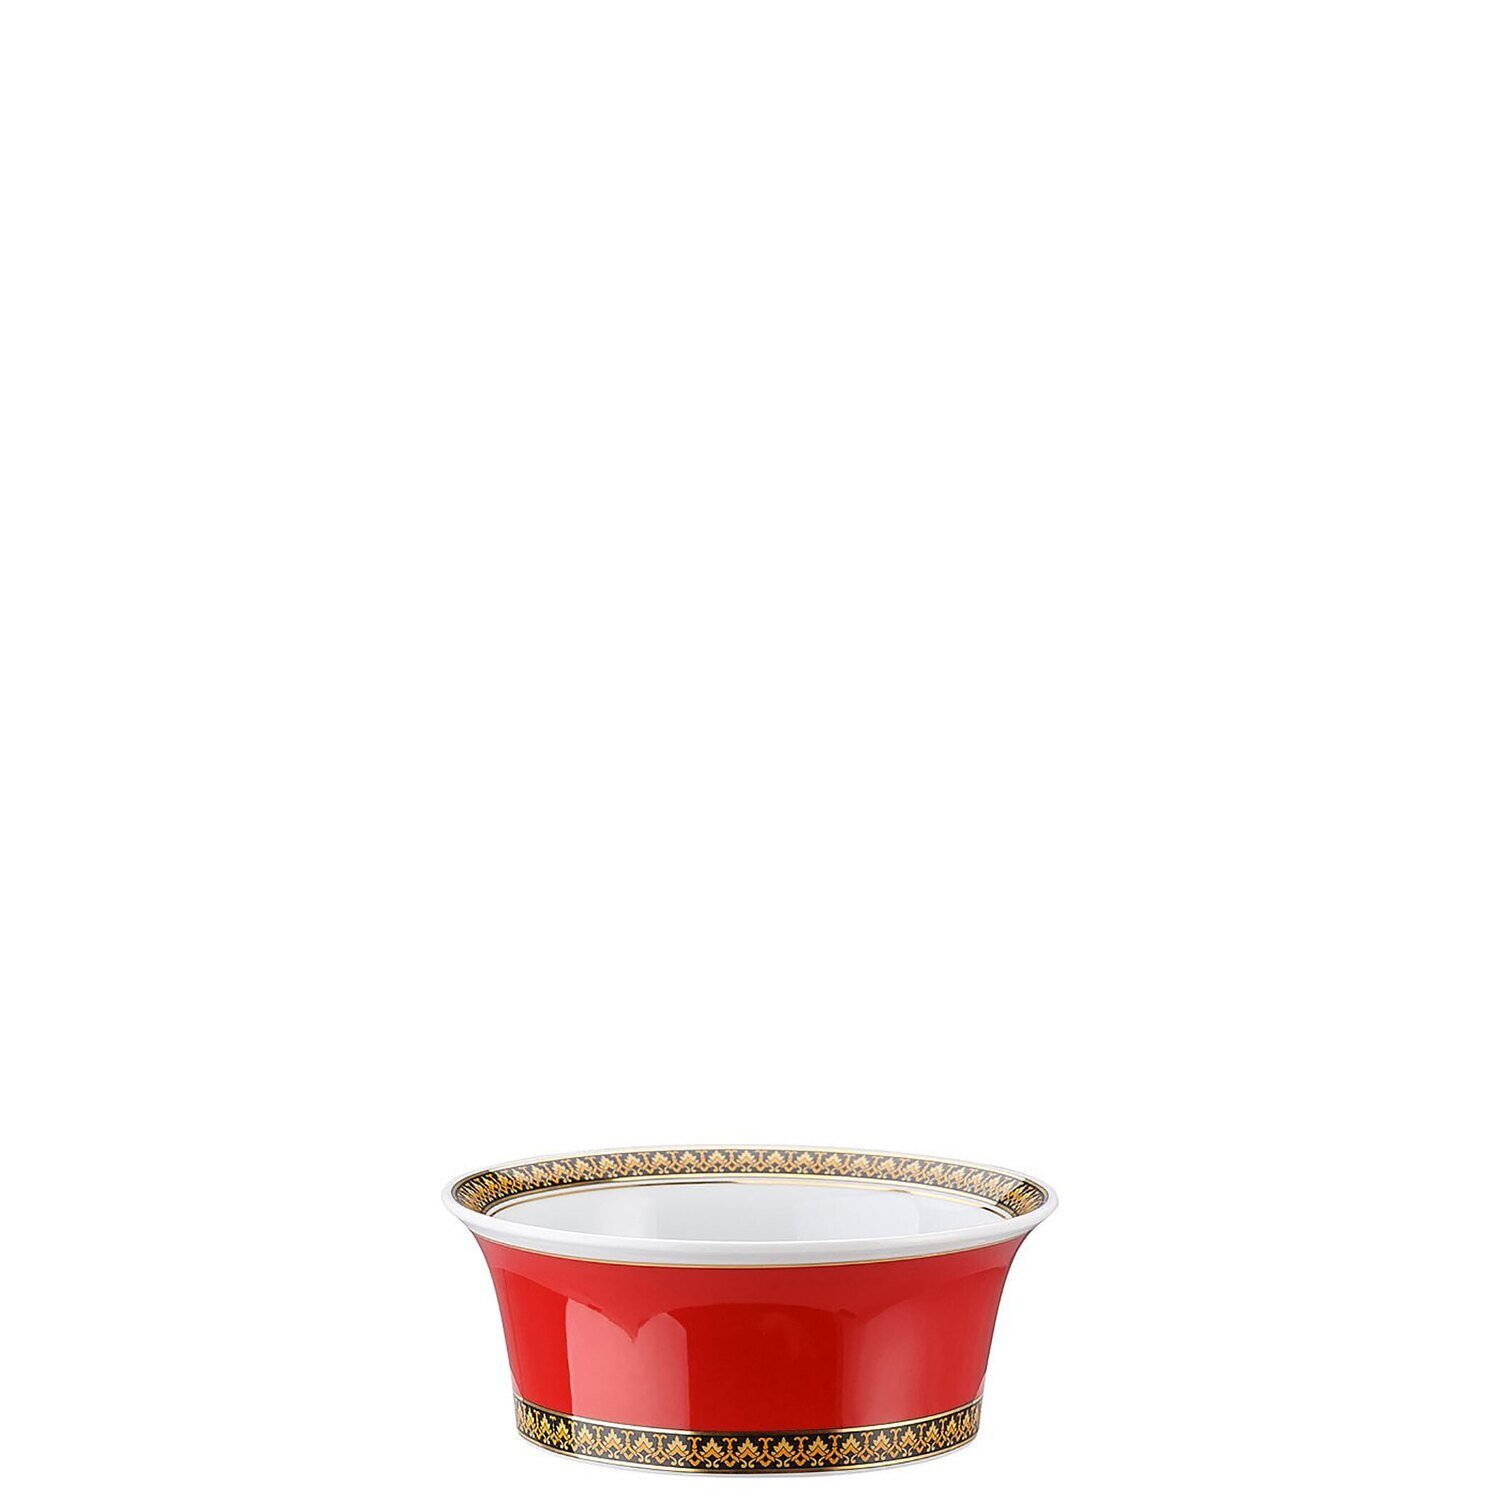 Versace Medusa Red Cereal Bowl 5 1/2 Inch